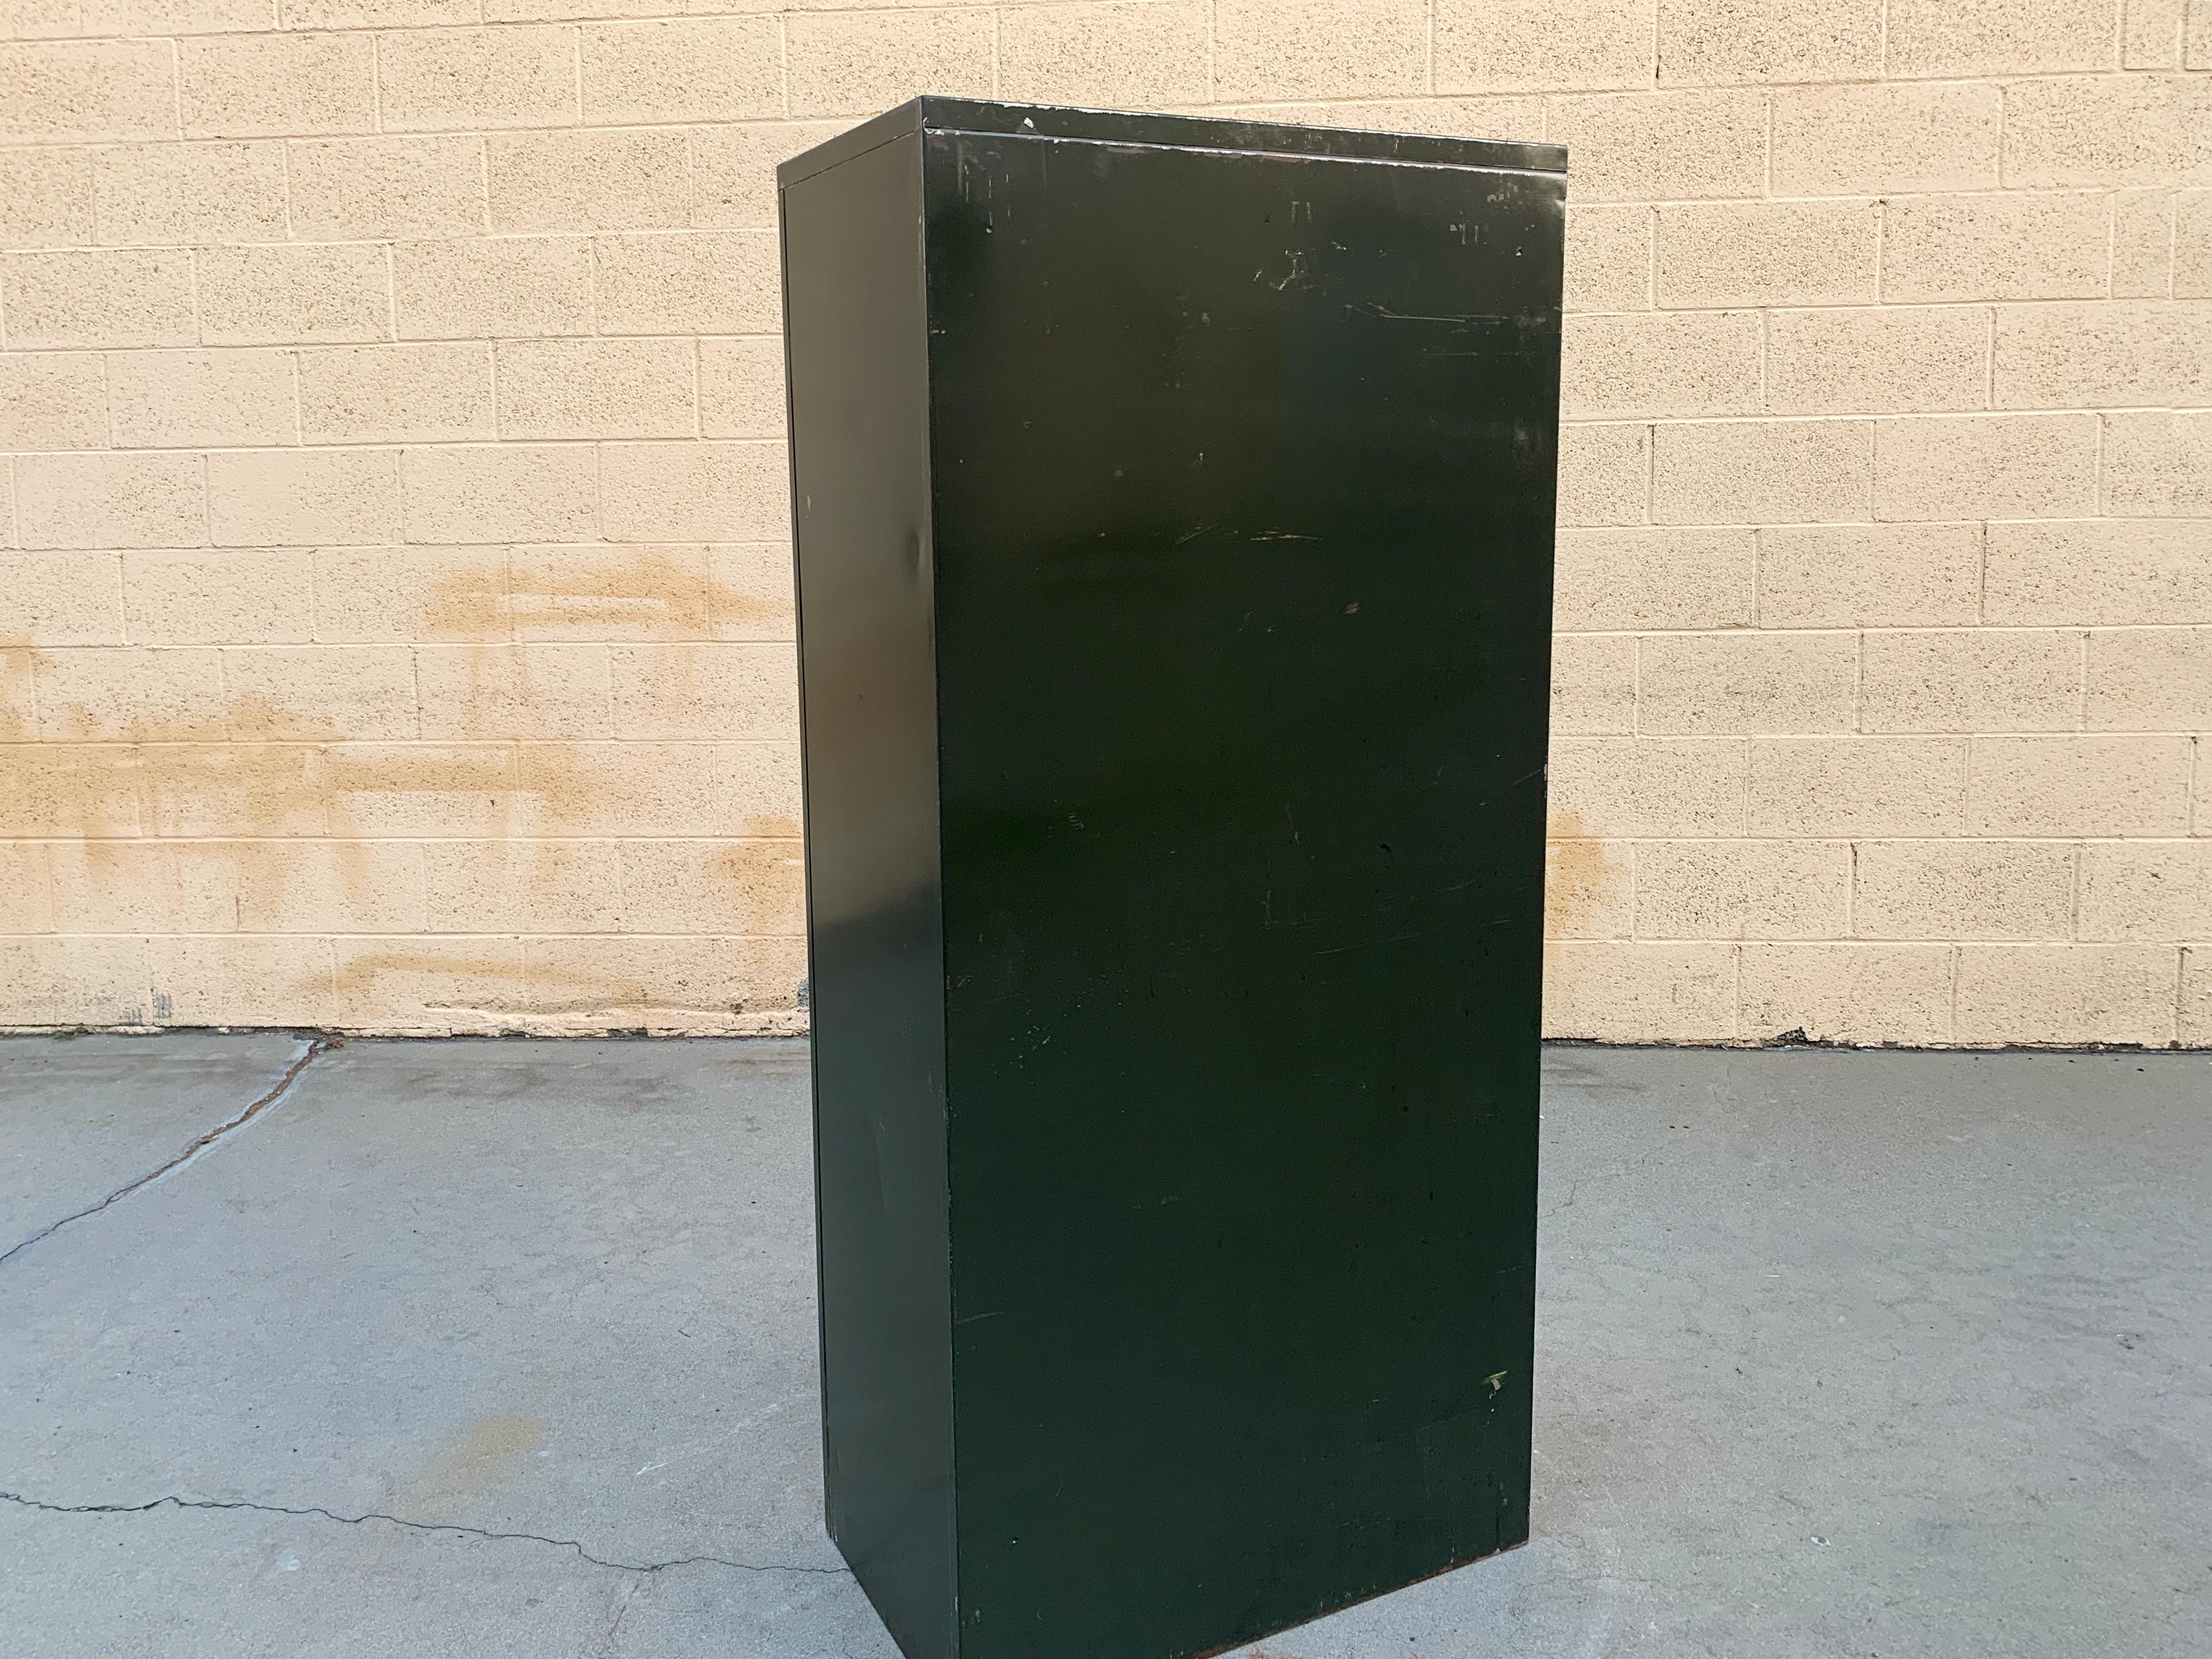 American 1940s File Cabinet by Steel Furniture Co., 5 Drawer Tall